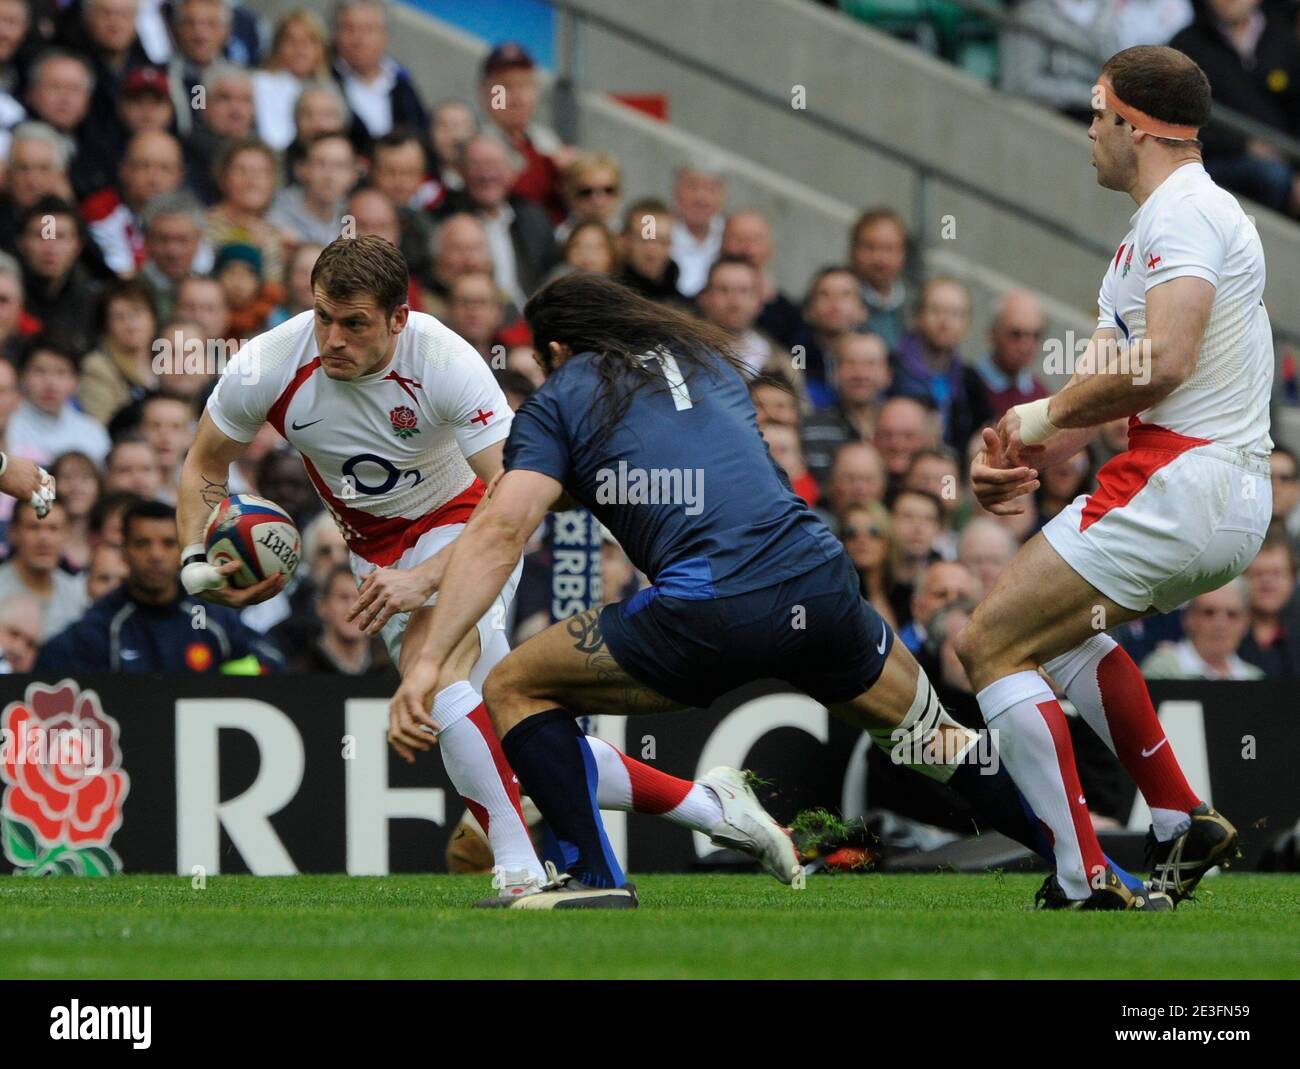 Try by Mark Cueto during the RBS 6 Nations Championship 2009 Rugby match, England vs France at the Twickenham stadium in London, UK on March 15, 2009. England won 34-10. Photo by Henri Szwarc/ABACAPRESS.COM Stock Photo